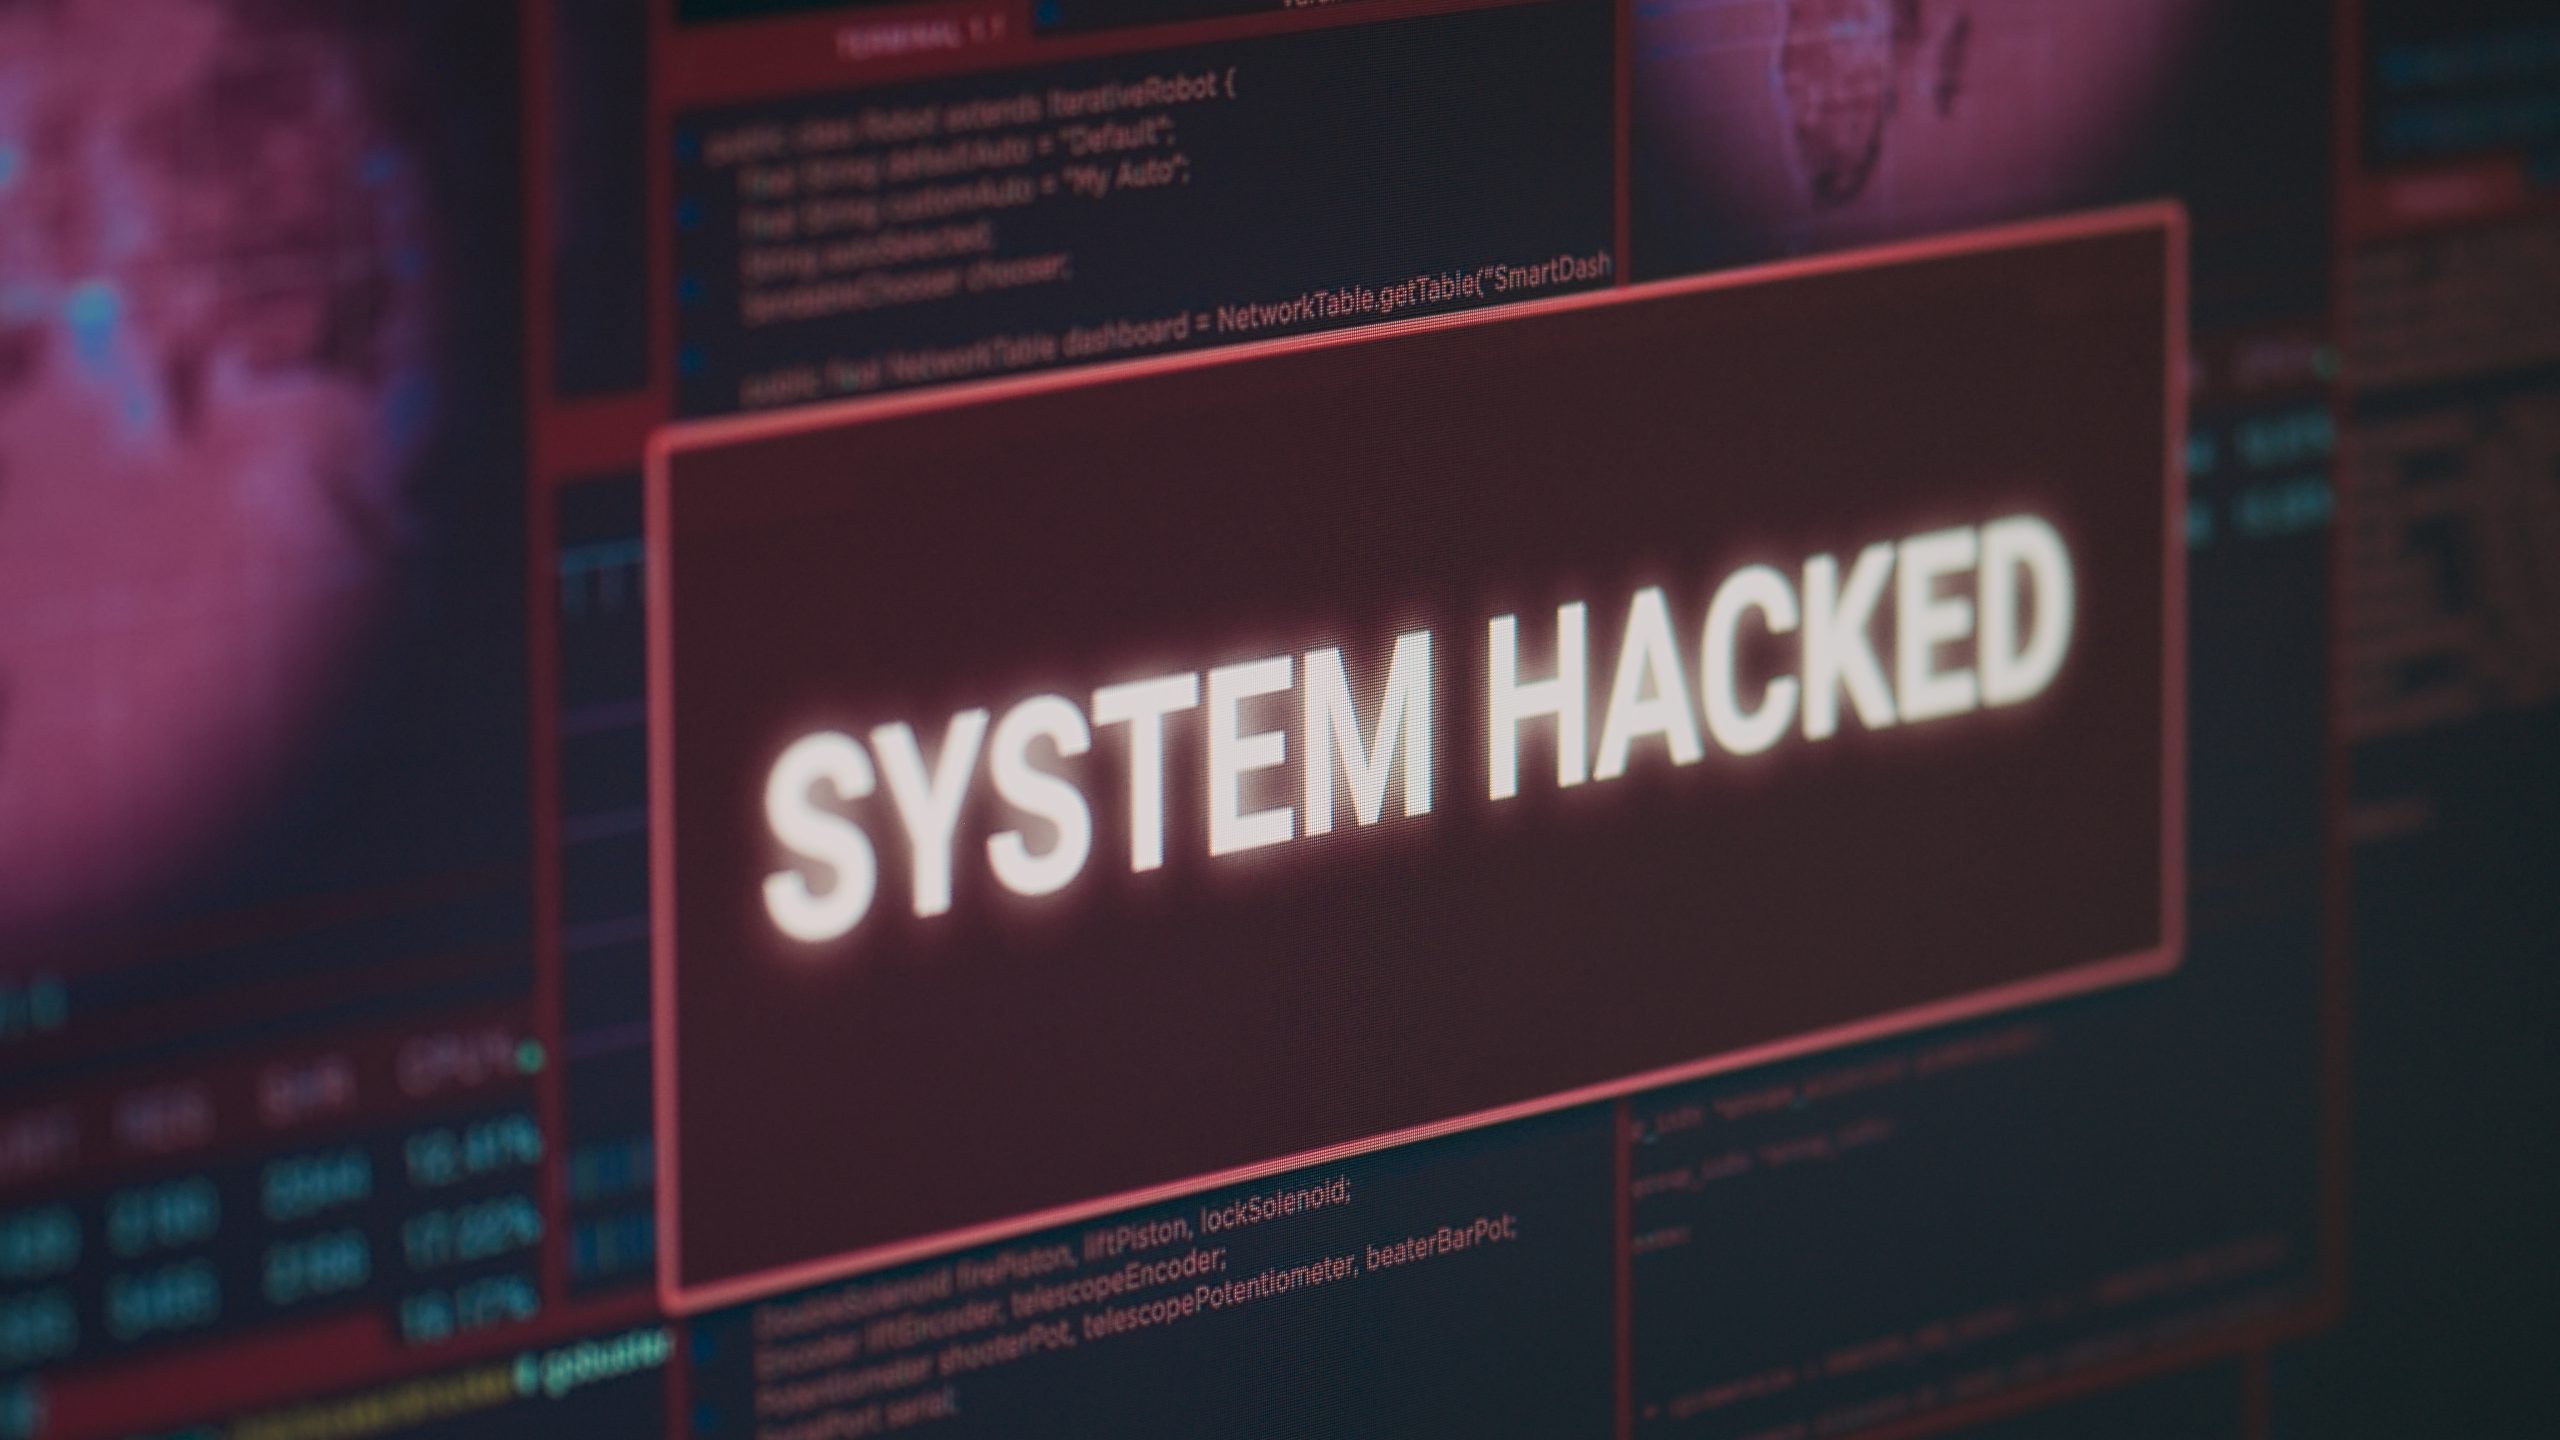 Computer monitor showing hacked system alert